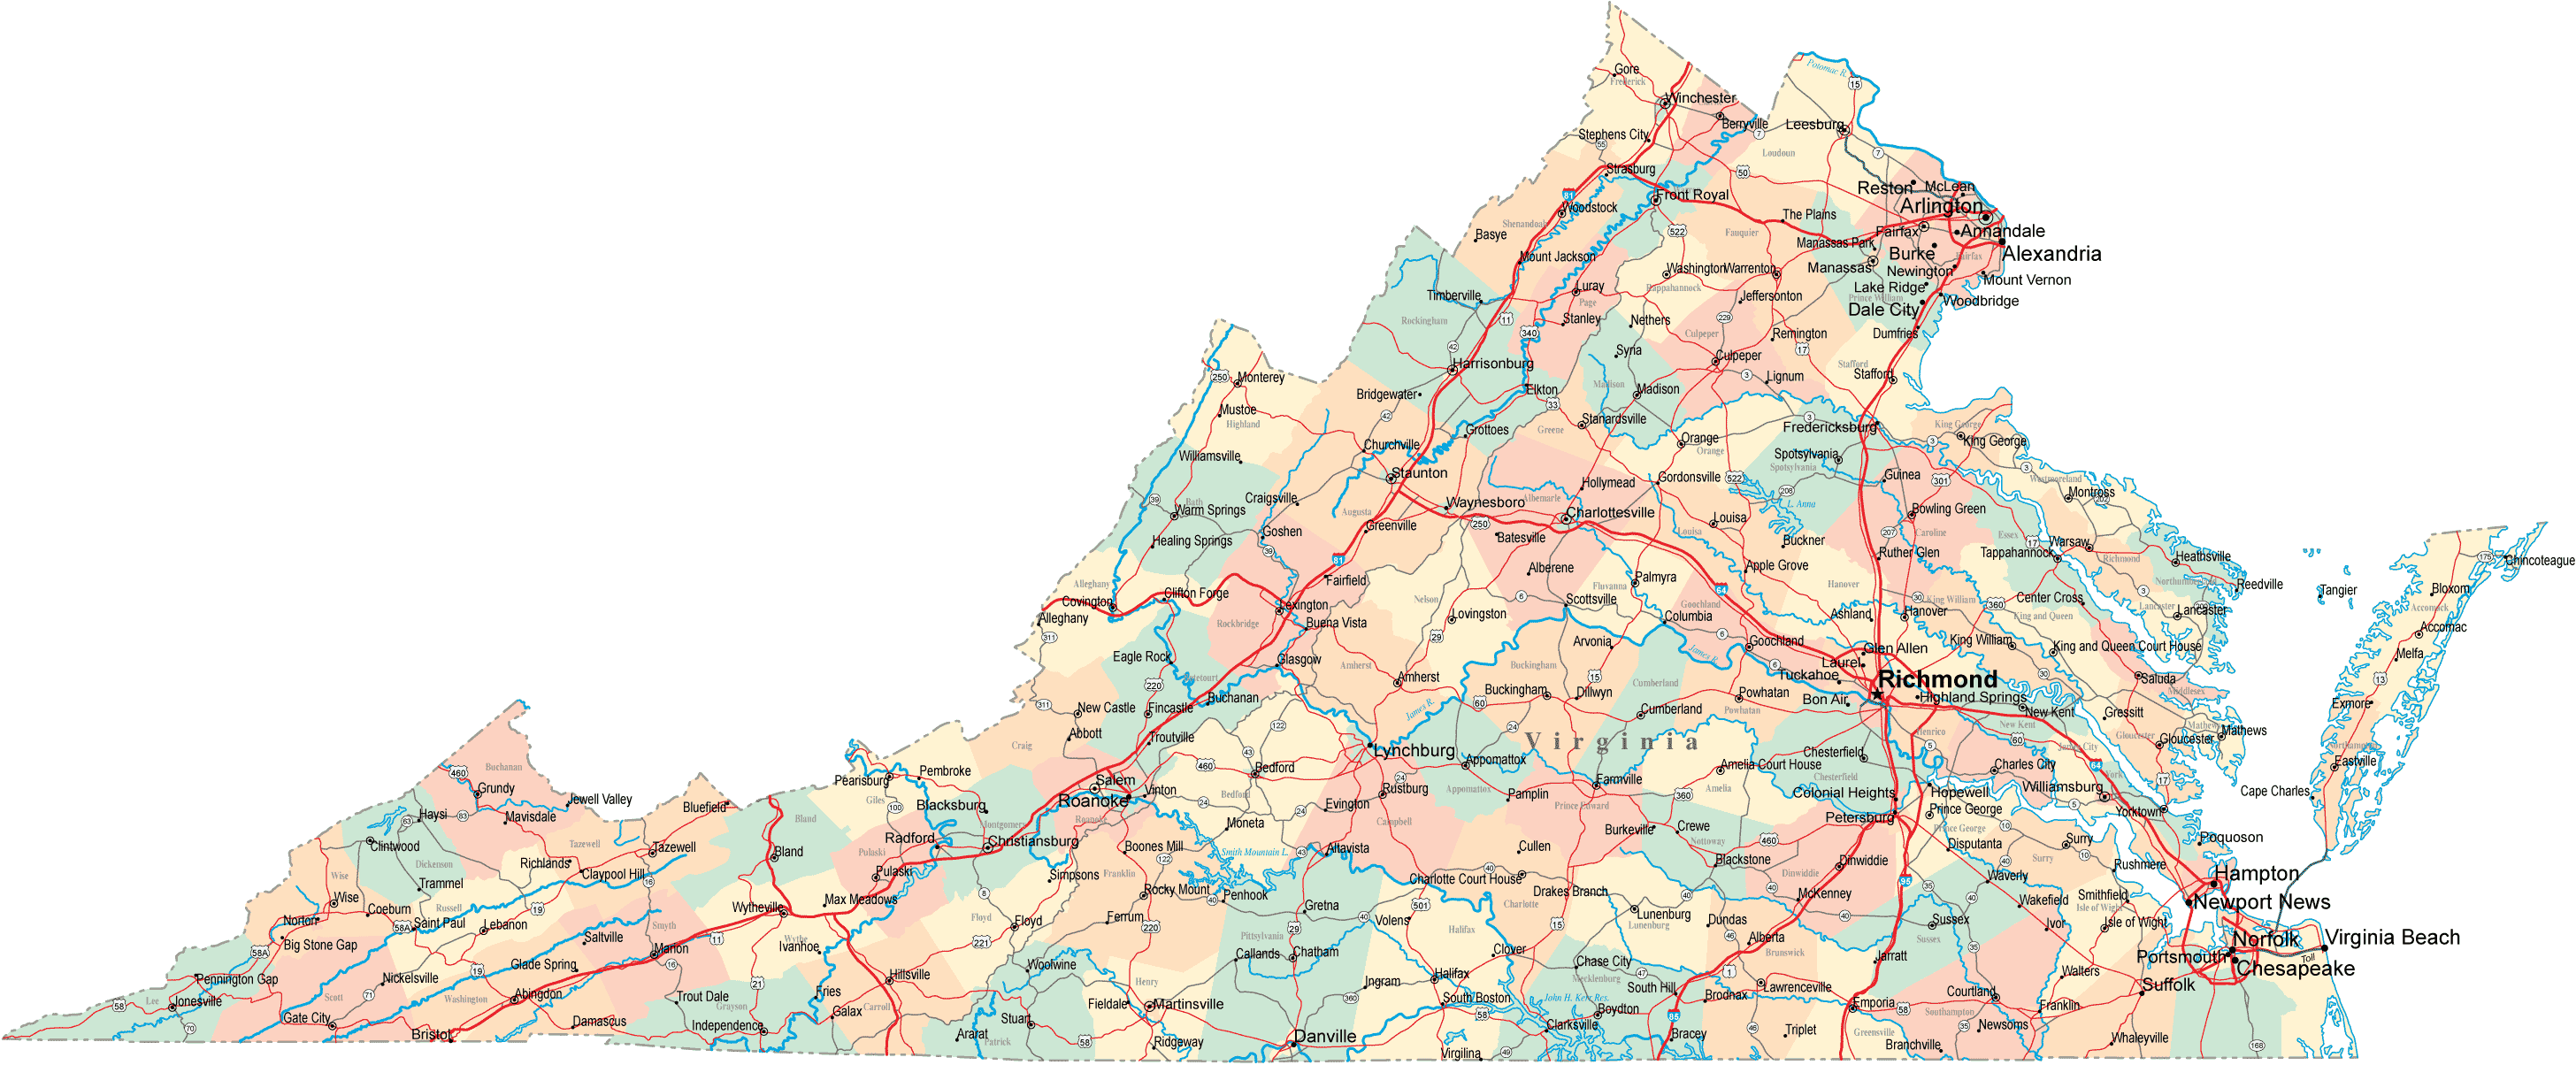 Virginia County Map With Roads Virginia Road Map   VA Road Map   Virginia Highway Map